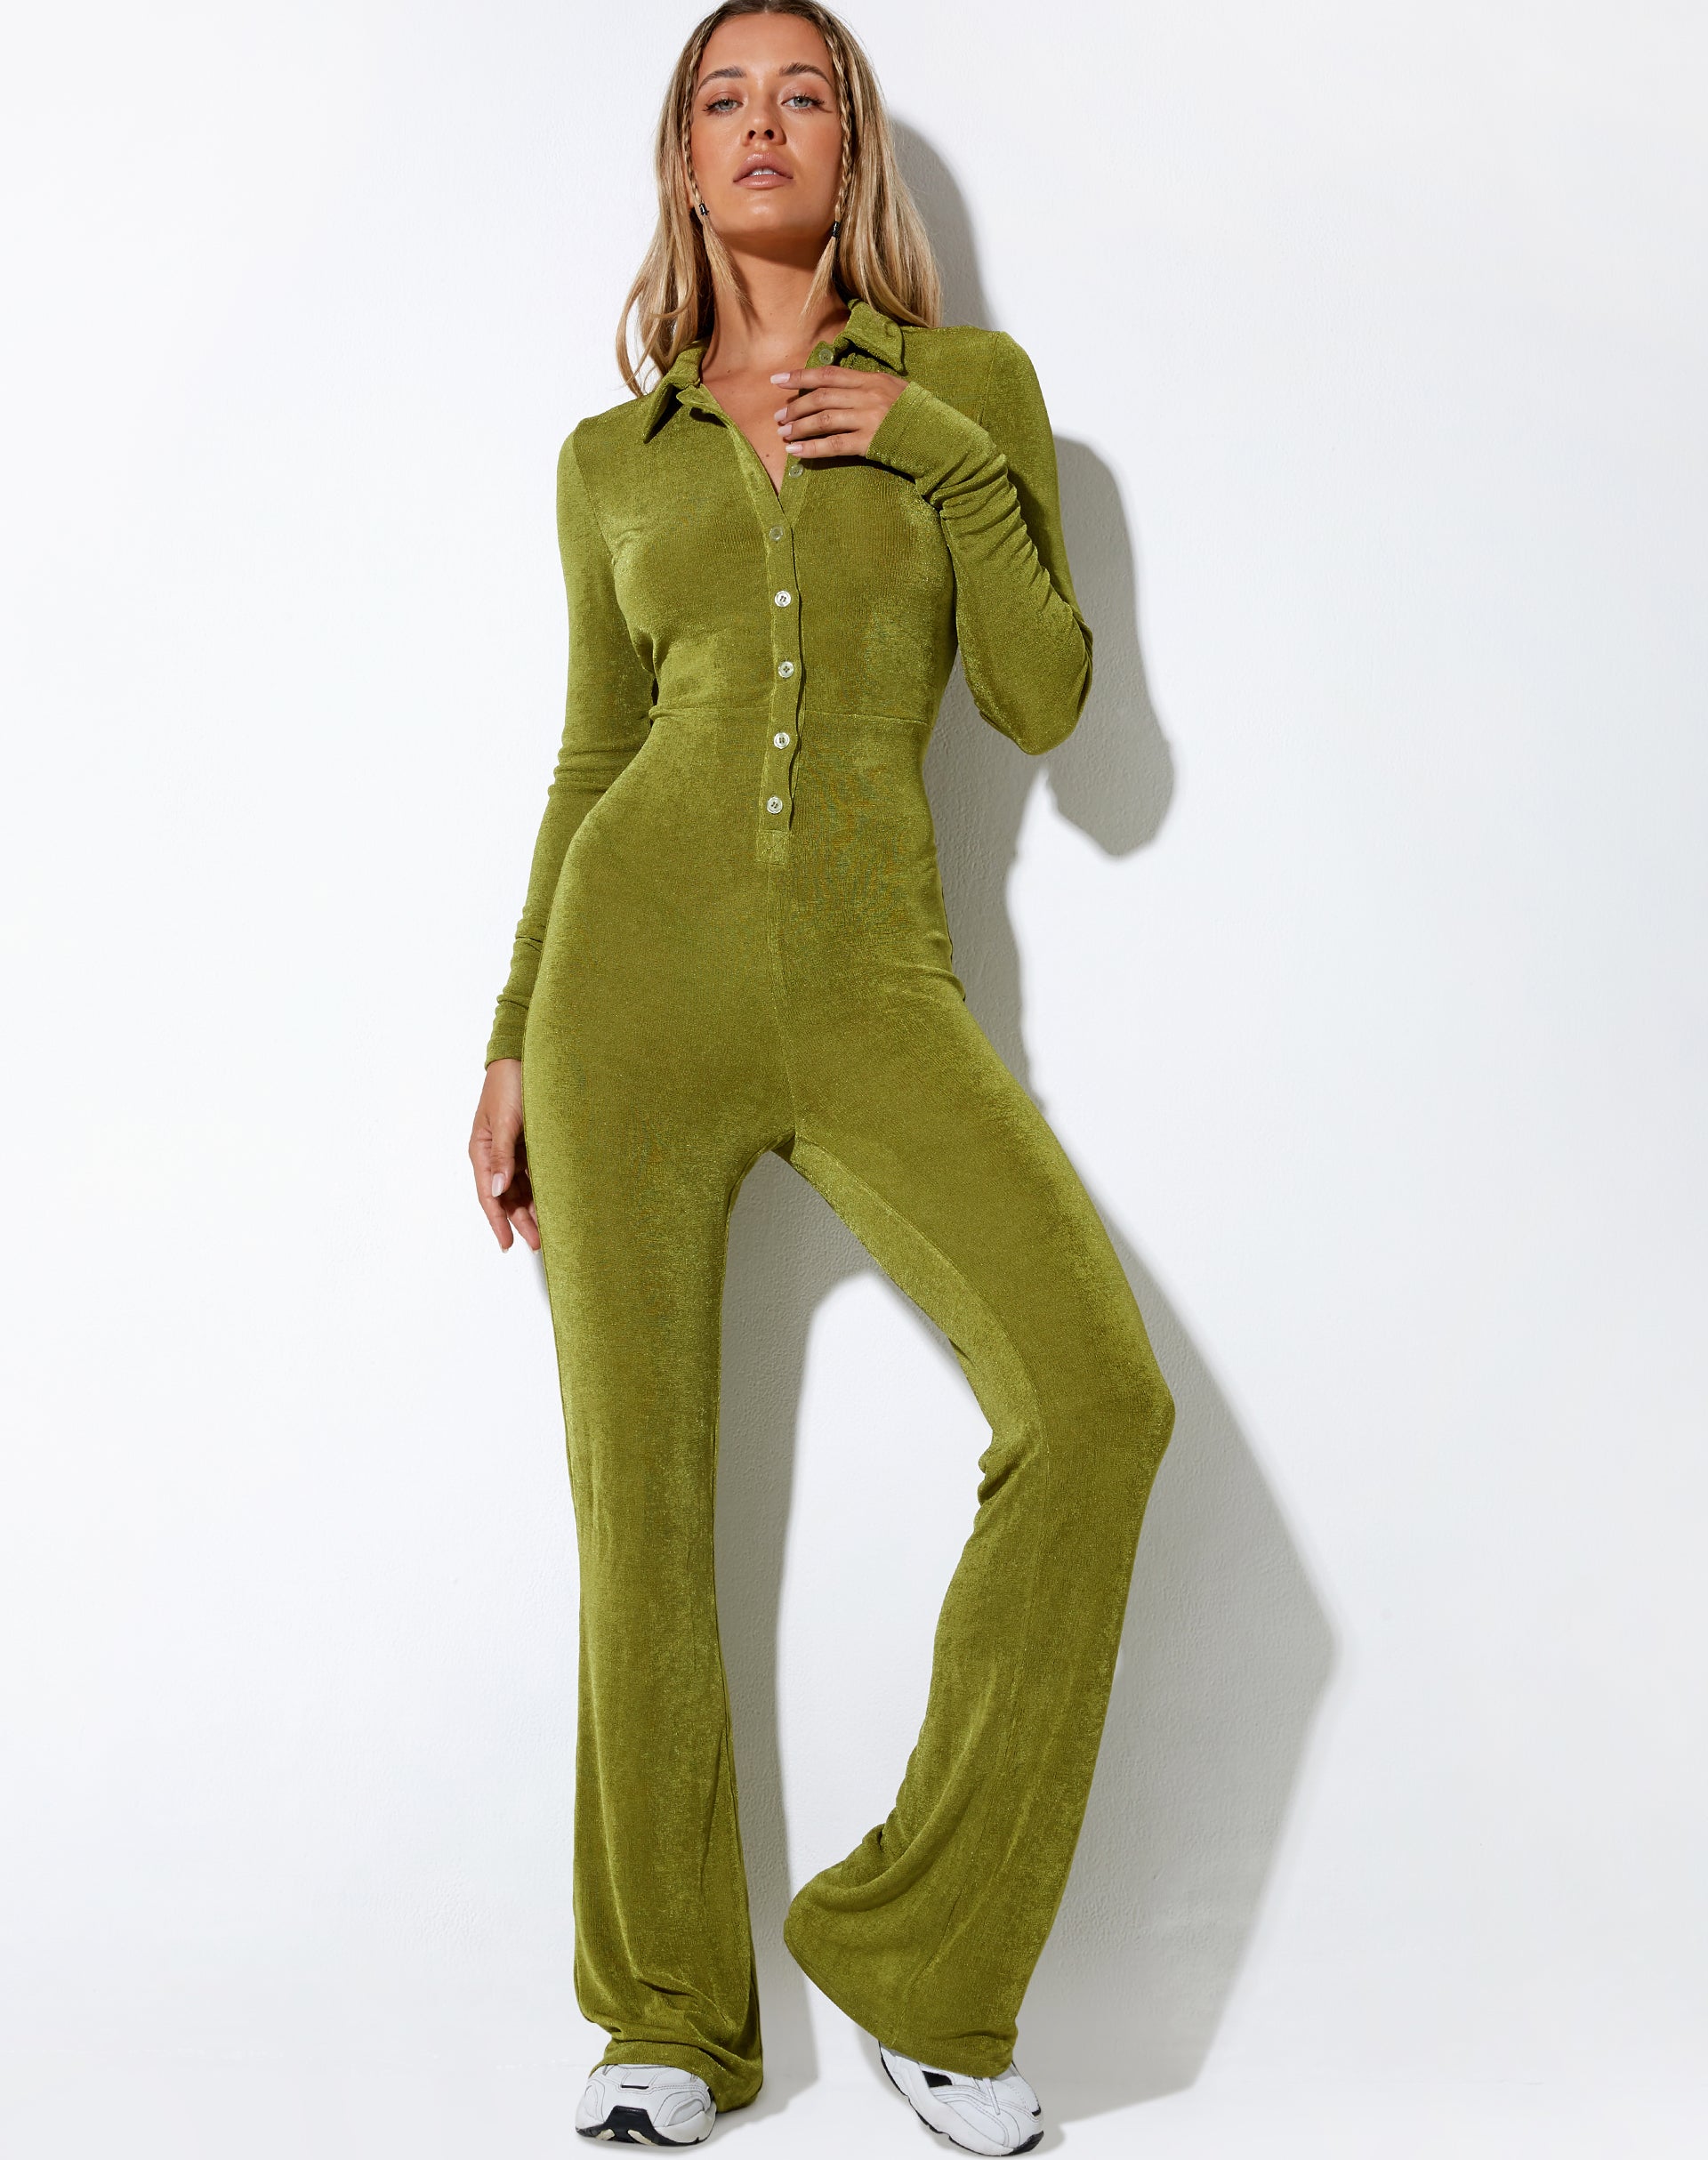 Salish Jumpsuit in Crepe Lime